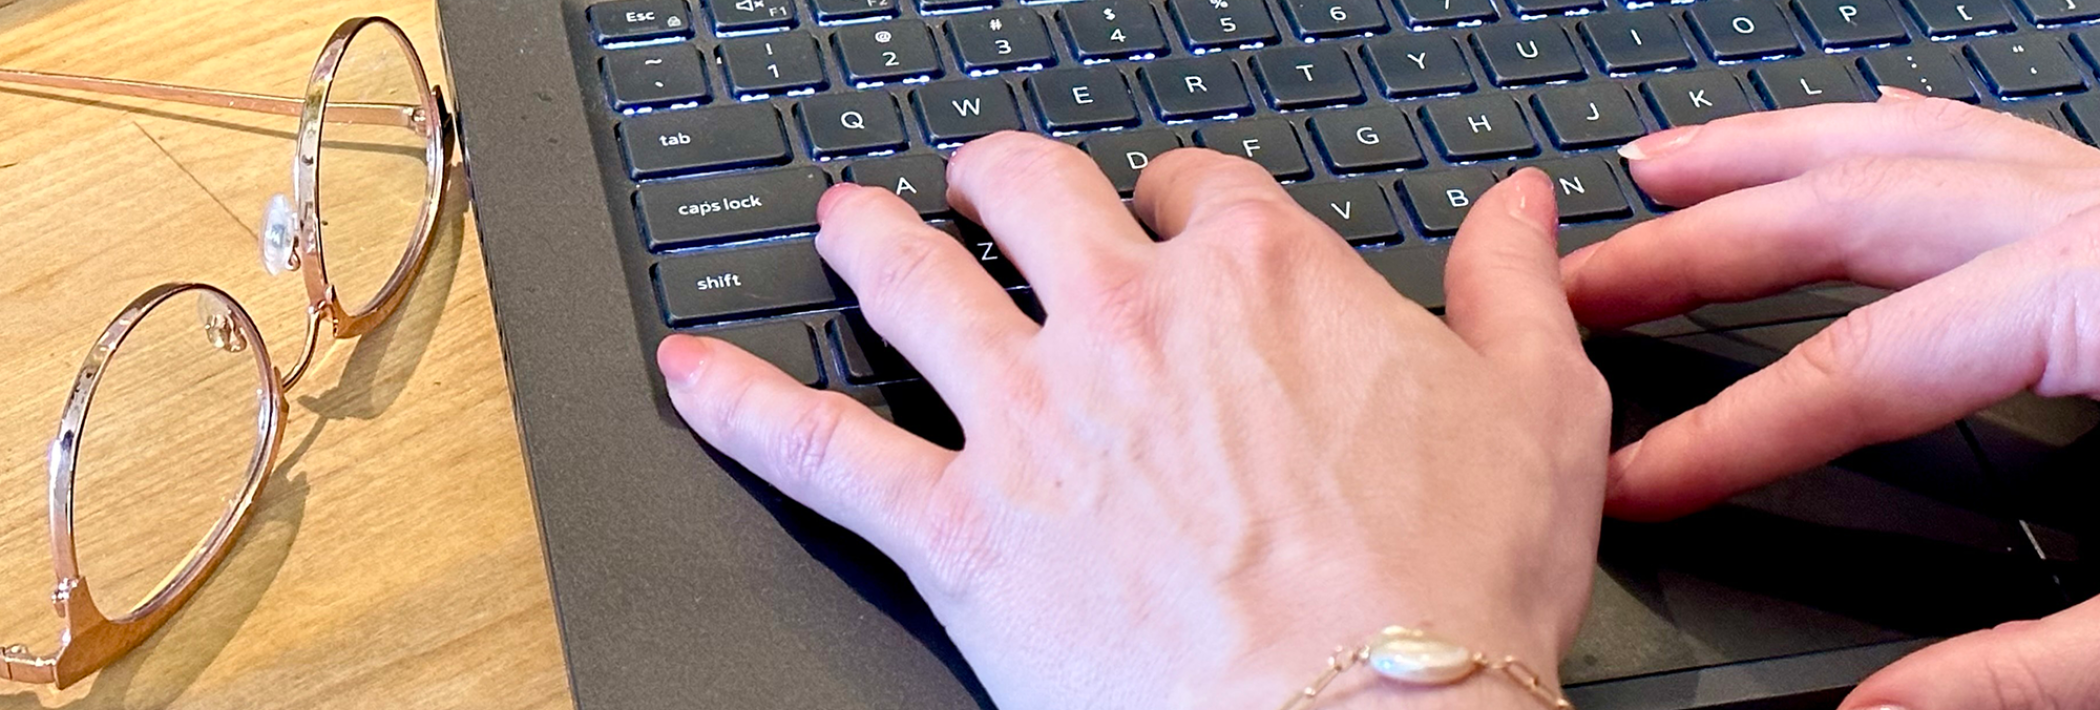 Hands typing on a laptop lying on a desk next to a pair of gold eyeglasses.